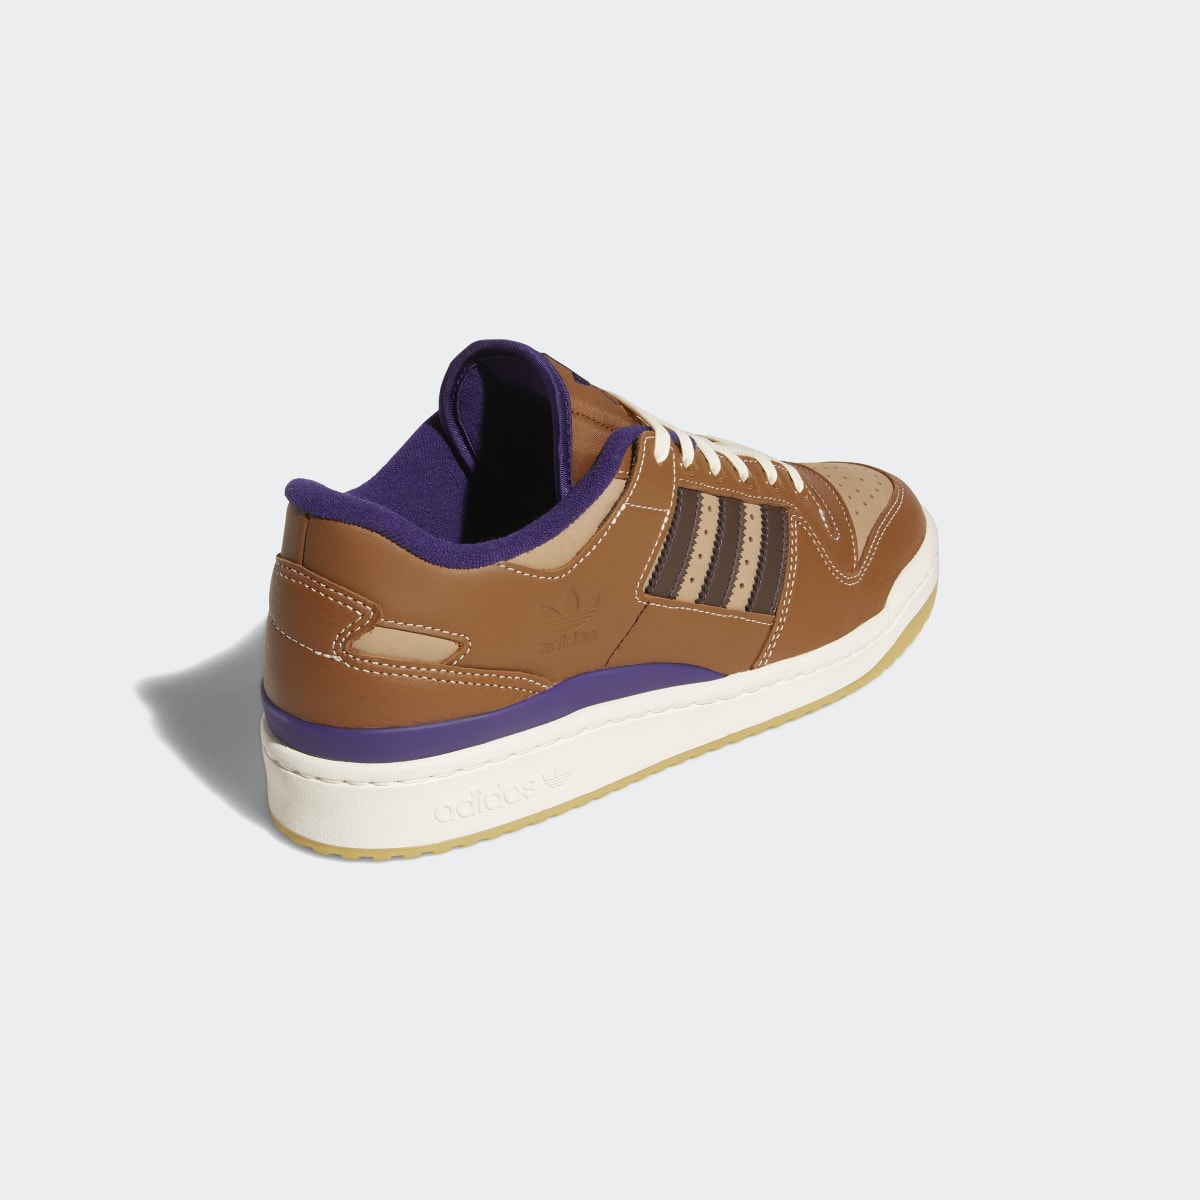 Adidas Heitor Forum 84 Low ADV Shoes. 8